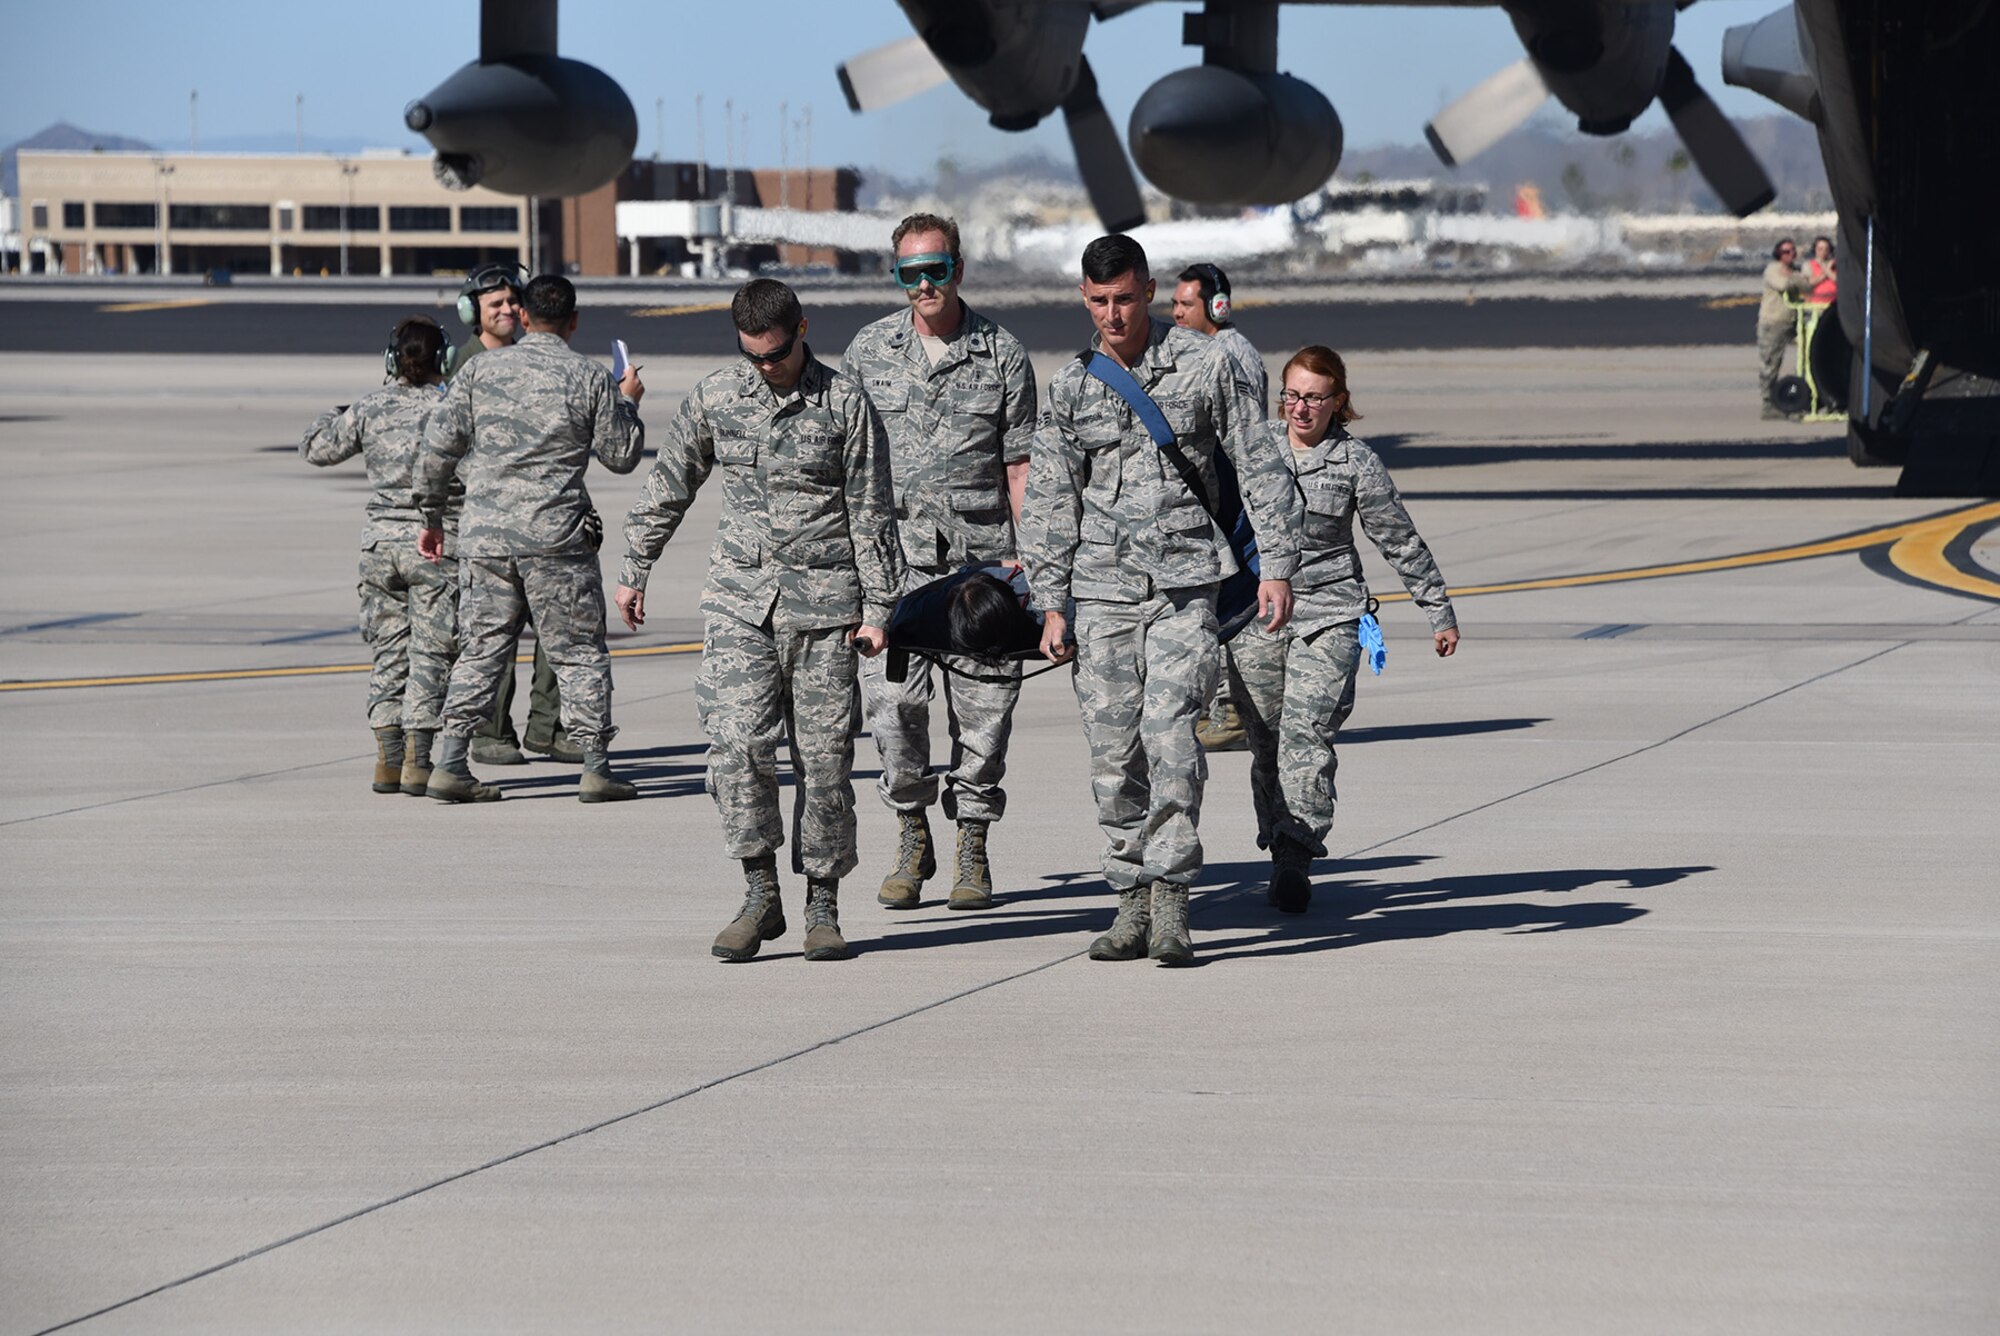 Medical personnel carry a patient off a C-130 Hercules aircraft for treatment during Vigilant Guard exercise at the 161st Air Refueling Wing in Phoenix, Arizona, Nov. 17, 2016. The Vigilant Guard exercise provides an opportunity for the Air and Army National Guard and to train in a joint operation environment. (U.S. Air National Guard photo by Master Sgt. Kelly Deitloff)